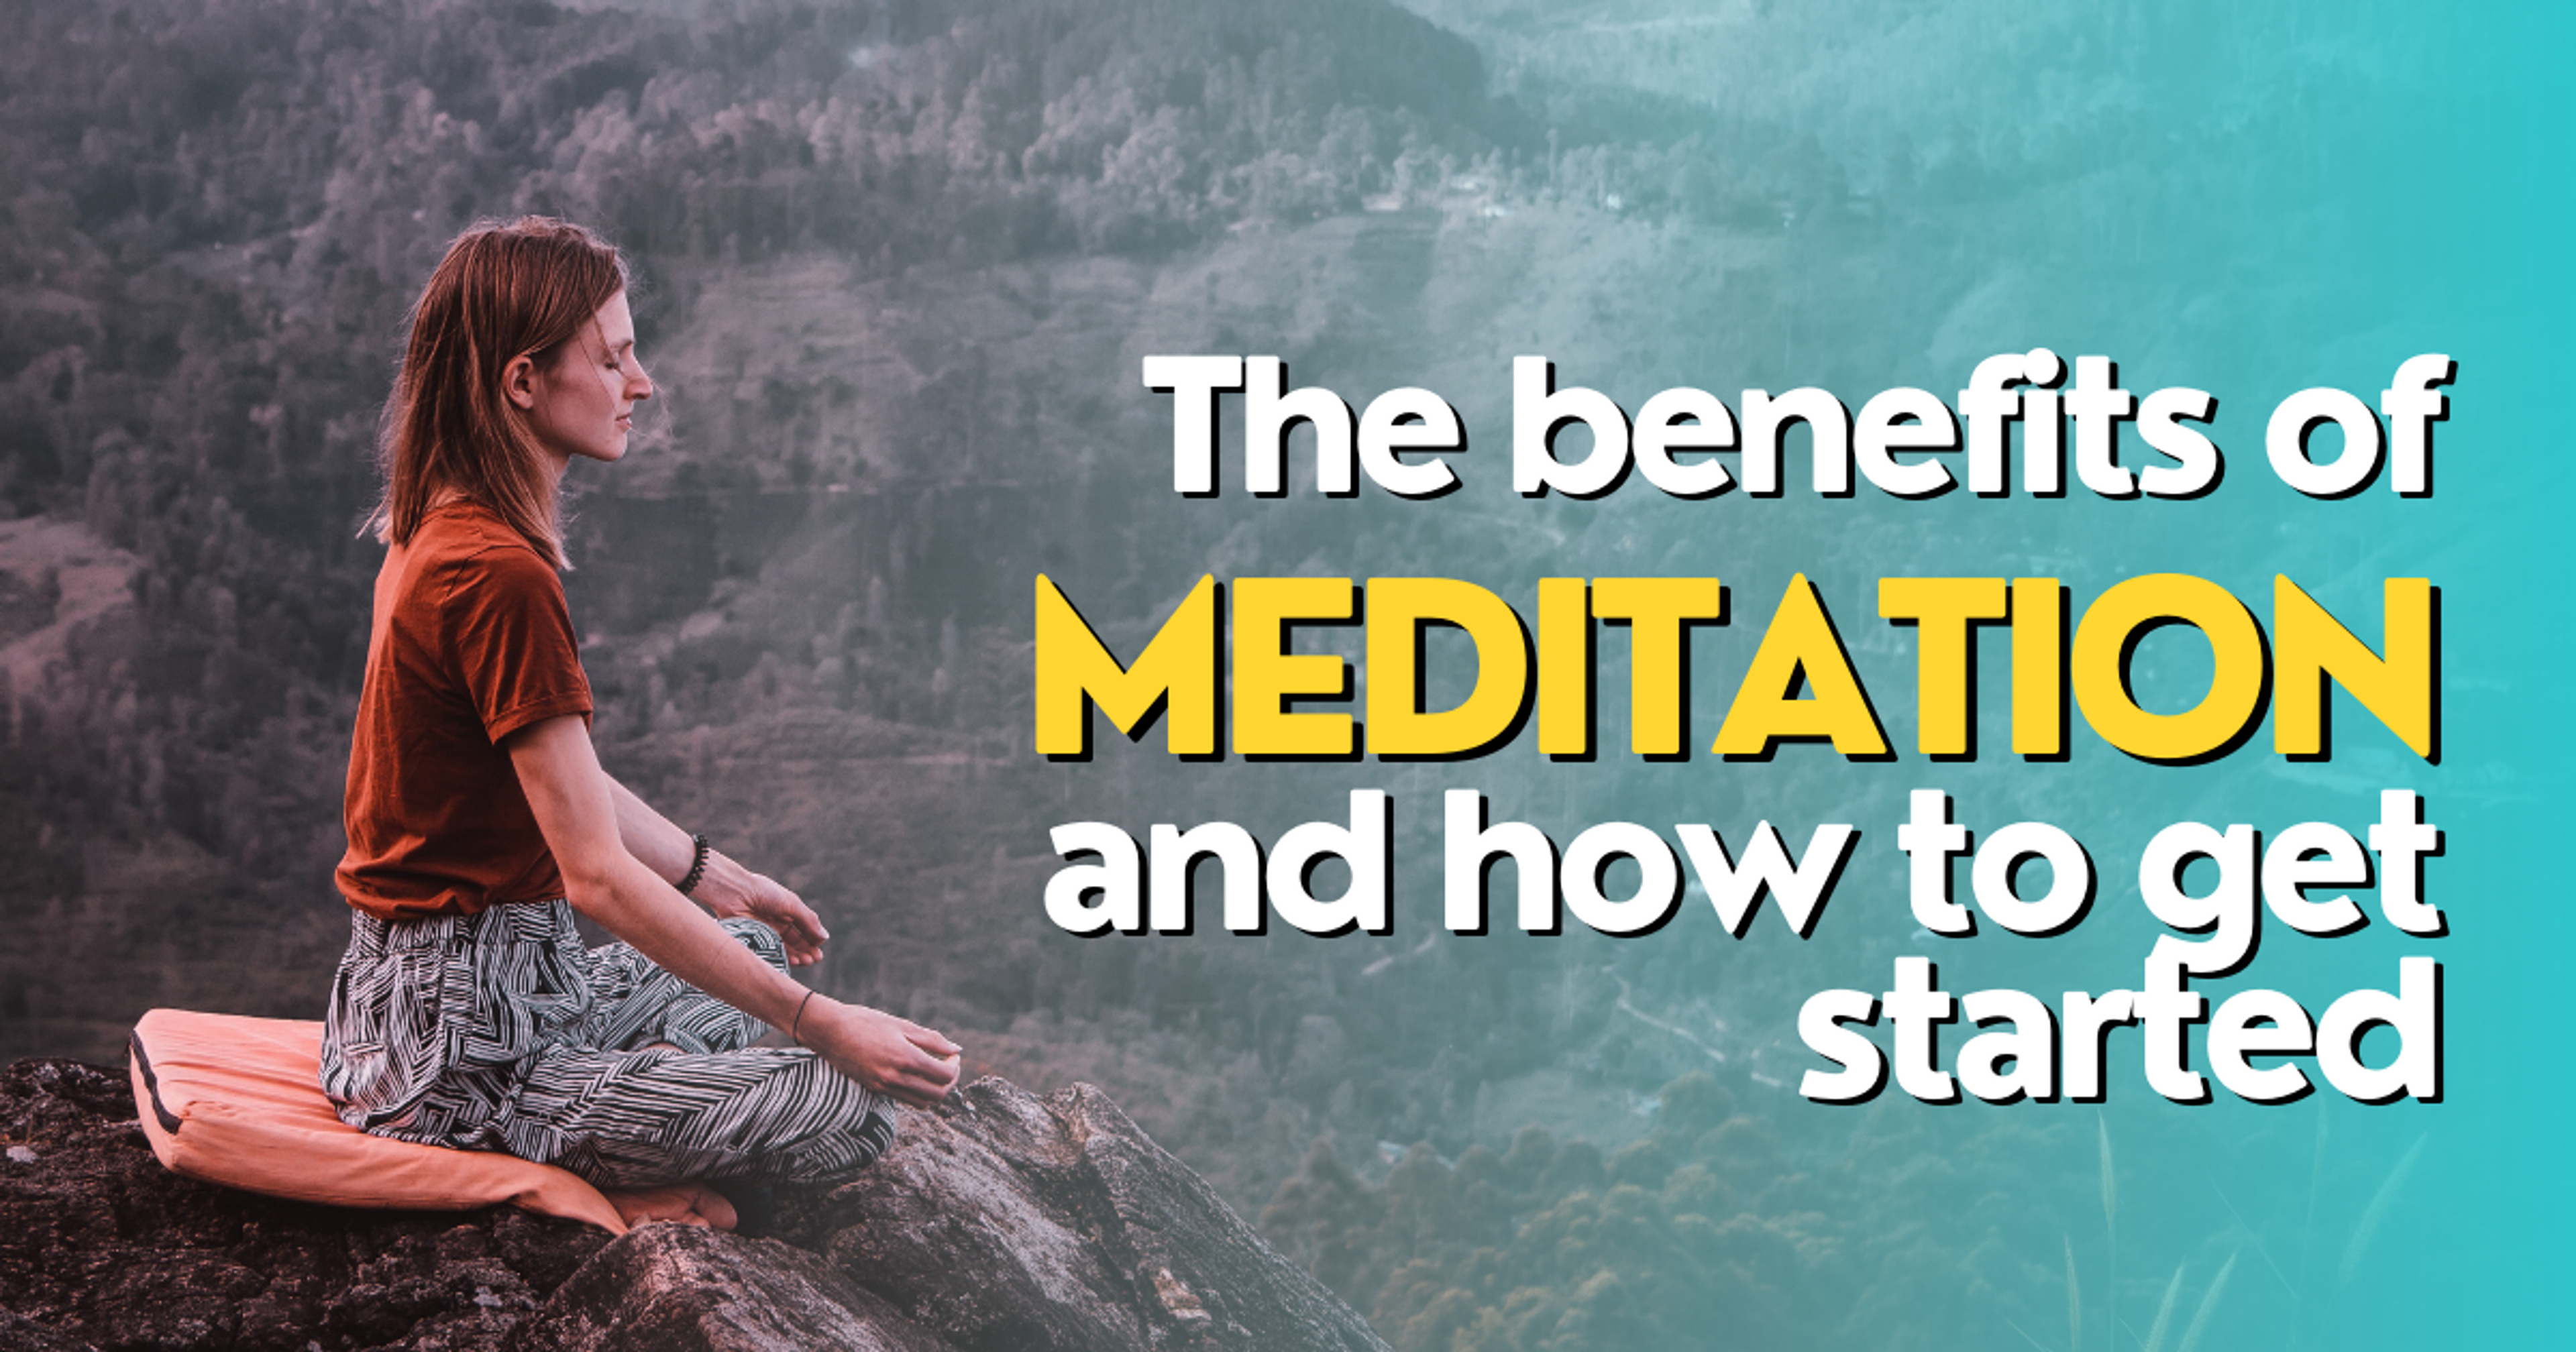 The Benefits of Meditation and How to Get Started